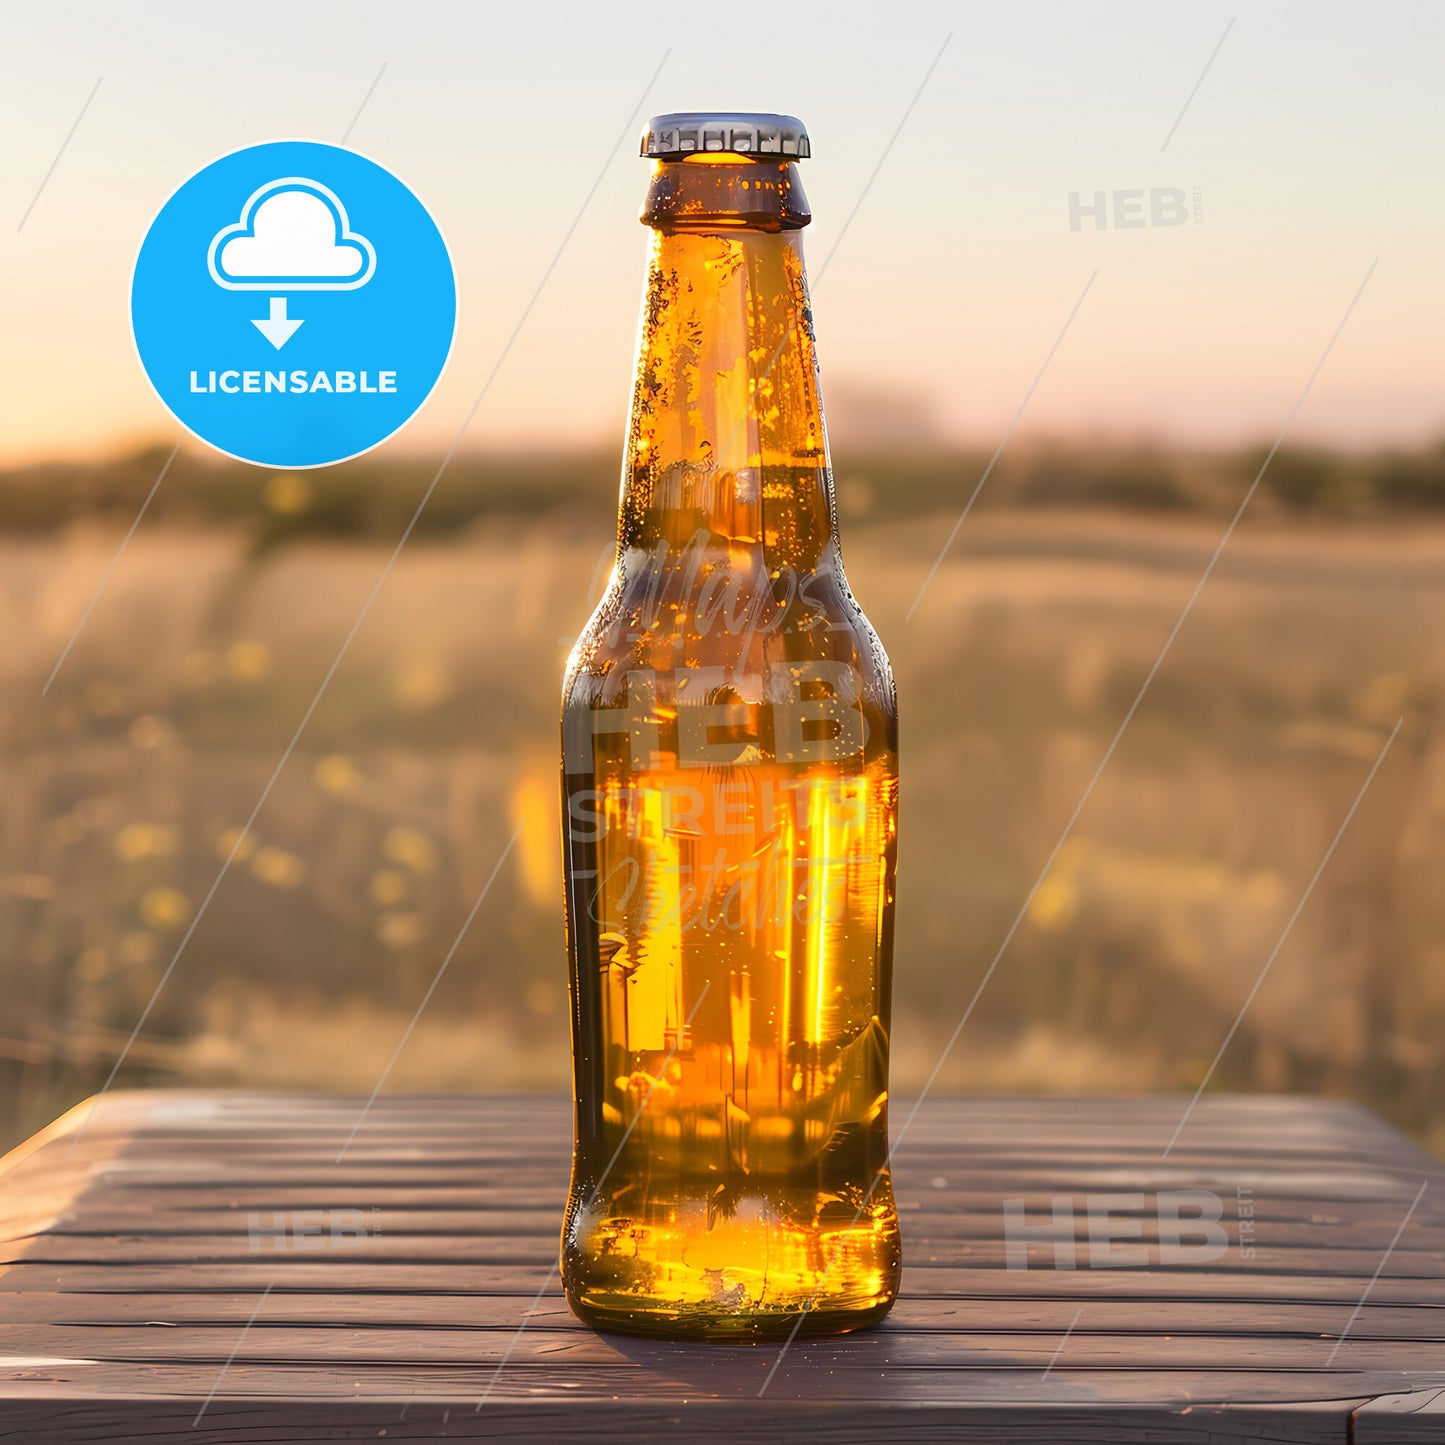 An Empty Beer Bottle Stands On A Wooden Table - A Bottle Of Beer On A Table